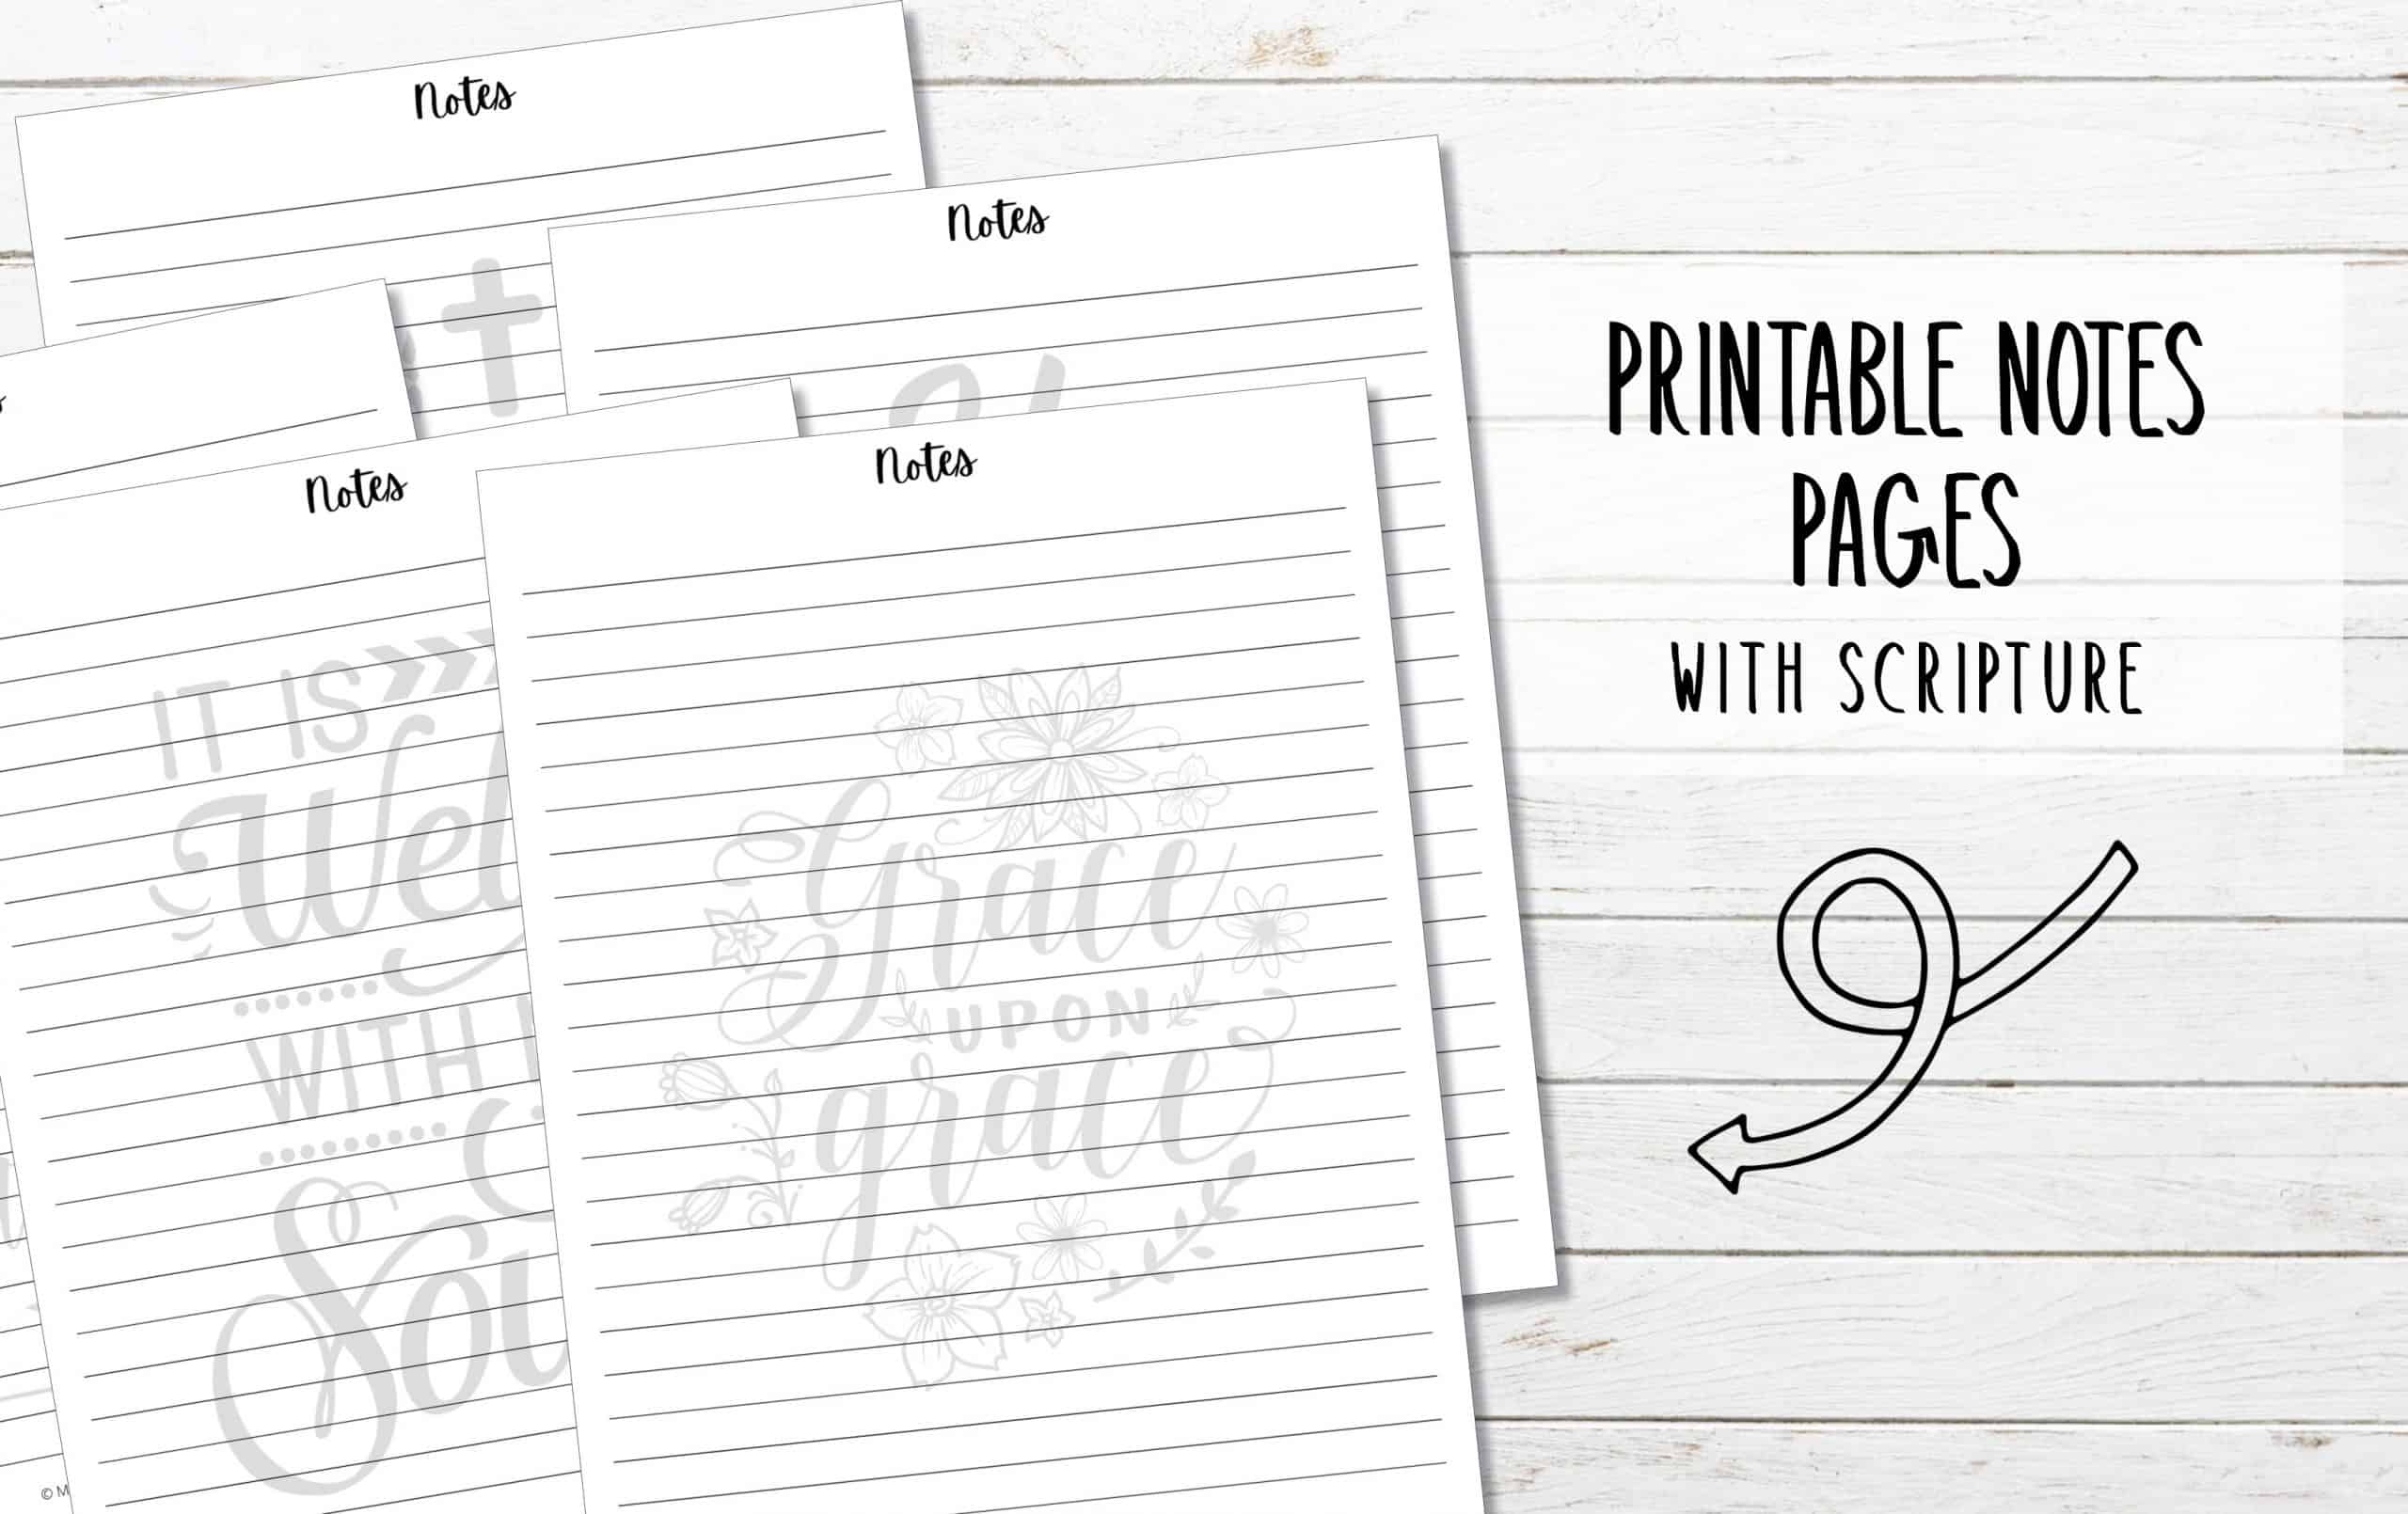 8 Printable Notes Pages with Scripture